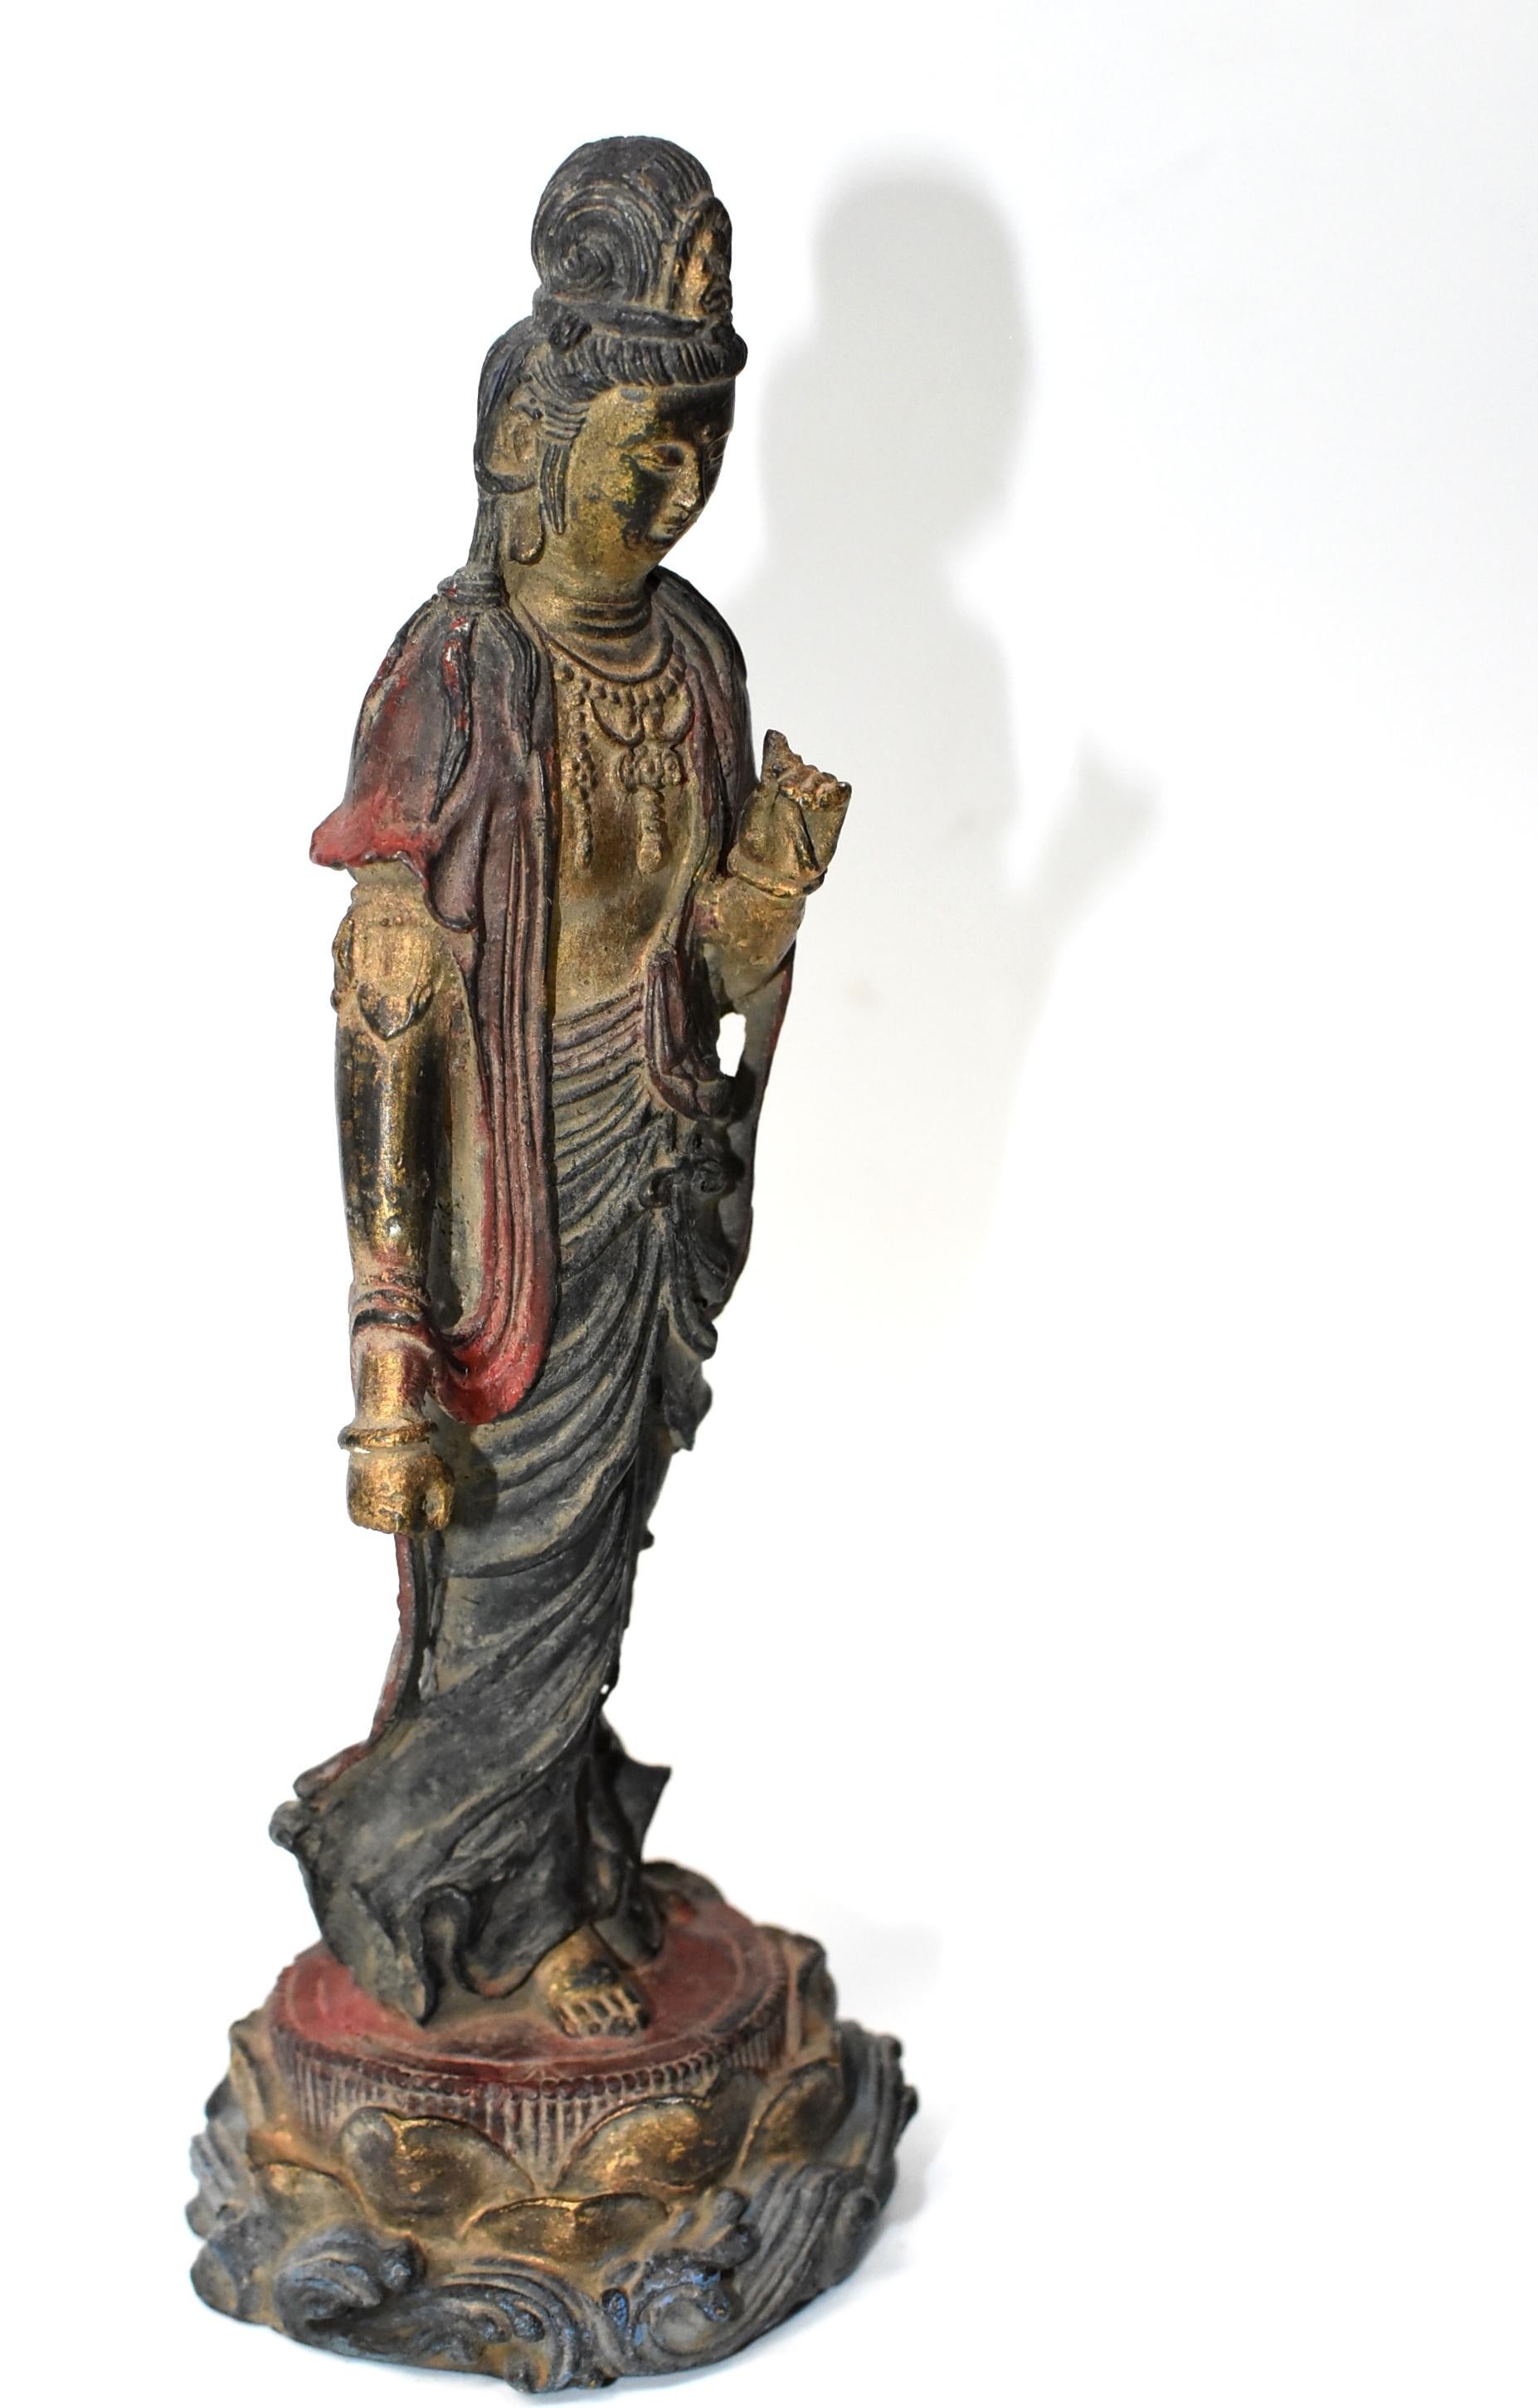 A small, fine example of standing Kwan Yin, one of the 4-piece 19th century collection we recently acquired. Kwan Yin is seated on a high lotus throne. Her robe is fluid and soft. She wears a necklace and wears her hair high. Her facial features,